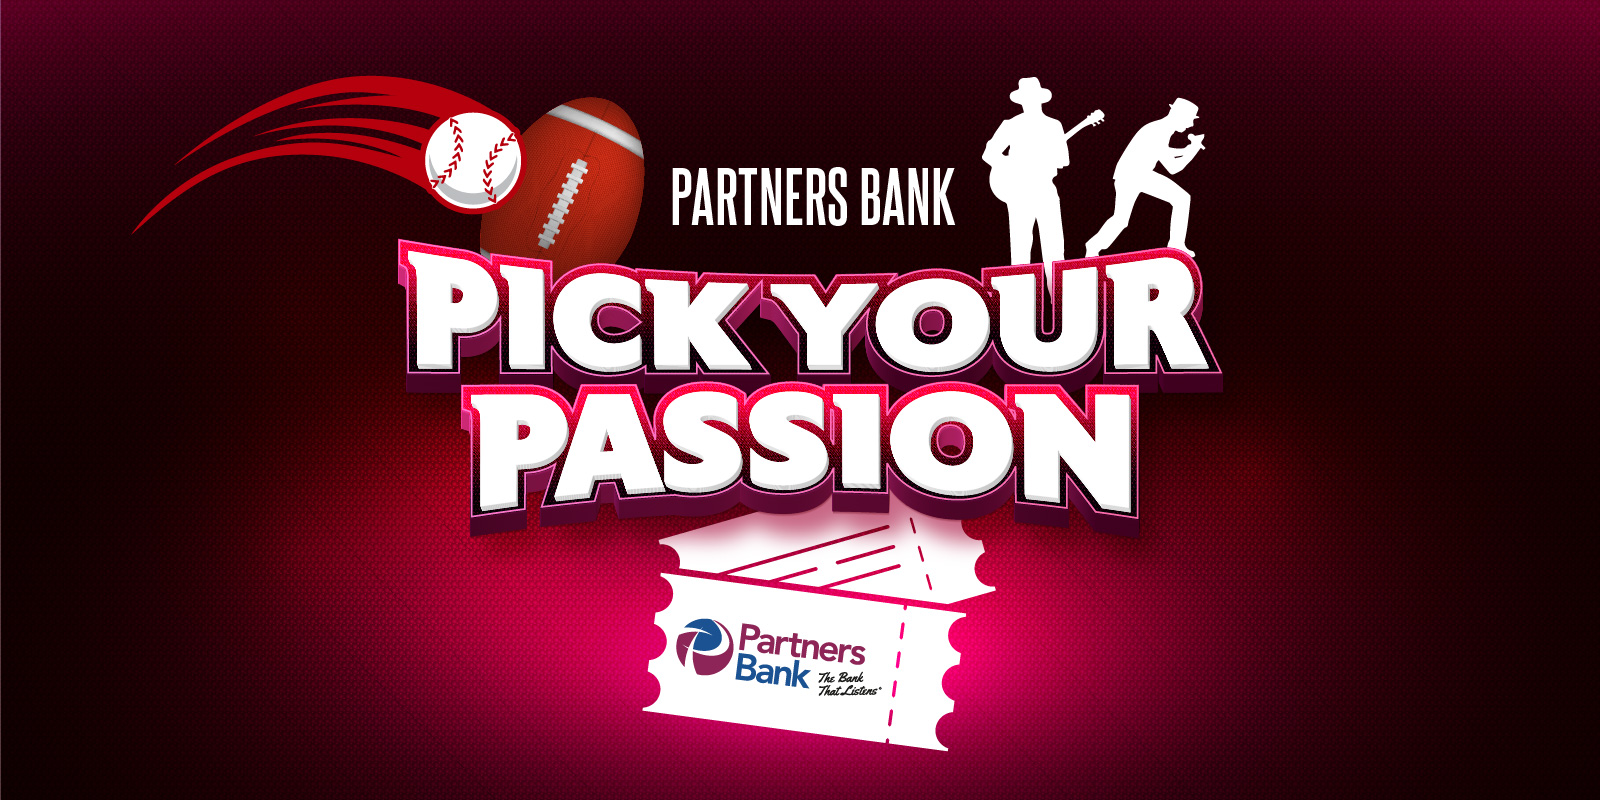 Partner’s Bank ‘Pick Your Passion’ Contest! Winners Choice of Football, Baseball, Or Concert Tickets!